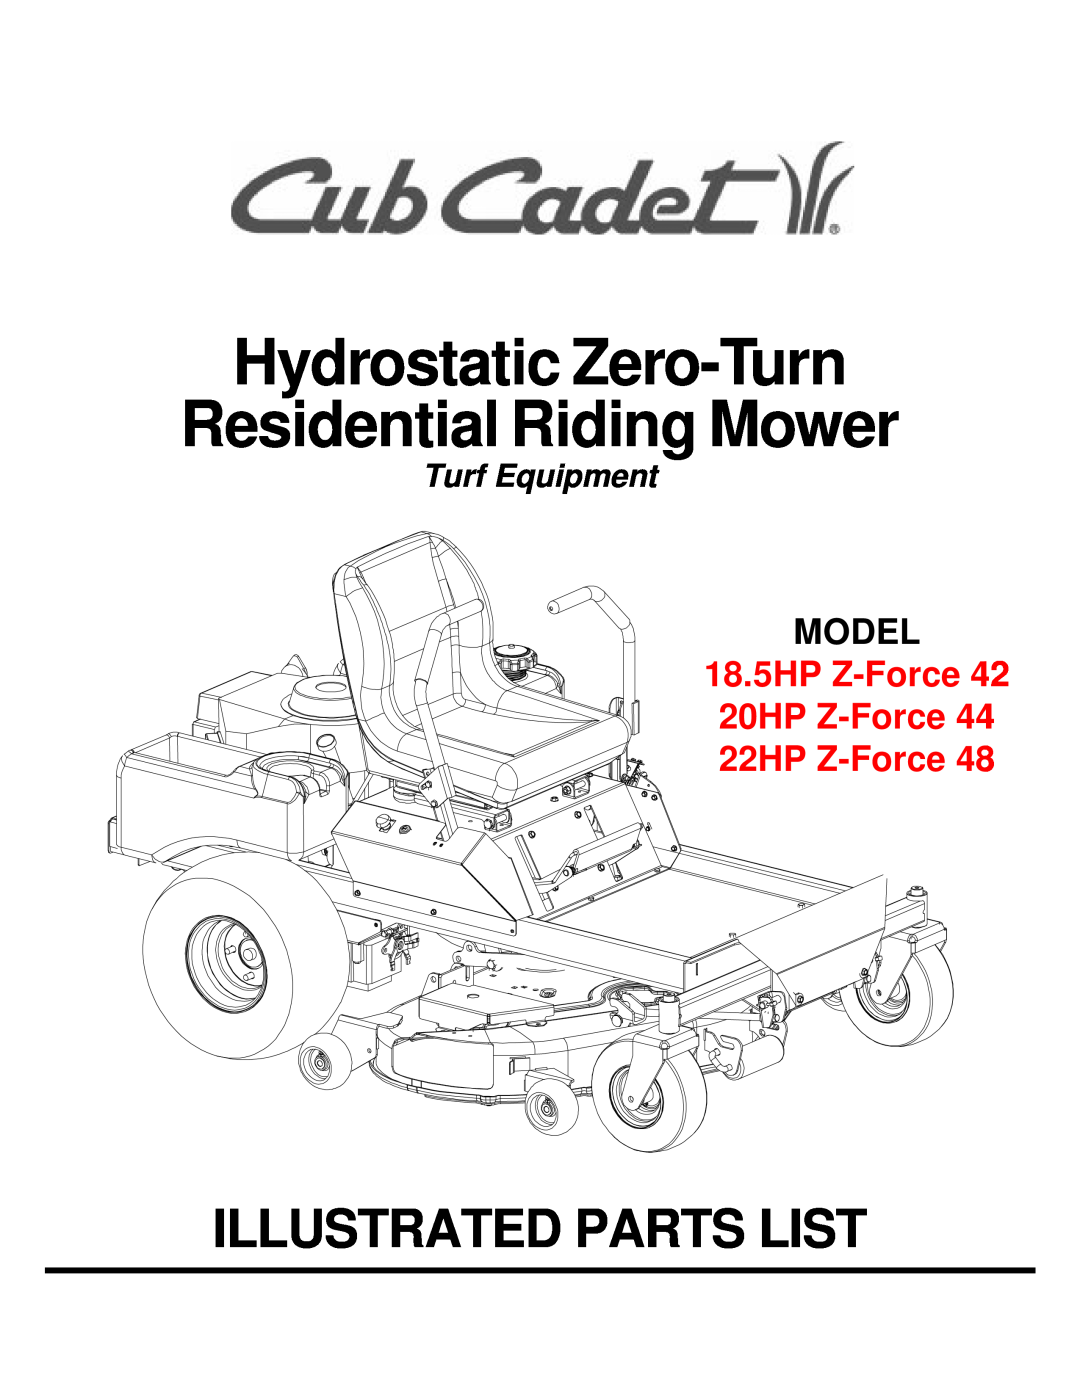 Cub Cadet 20HP Z-Force 44 manual Hydrostatic Zero-Turn Residential Riding Mower, Illustrated Parts List, Model 